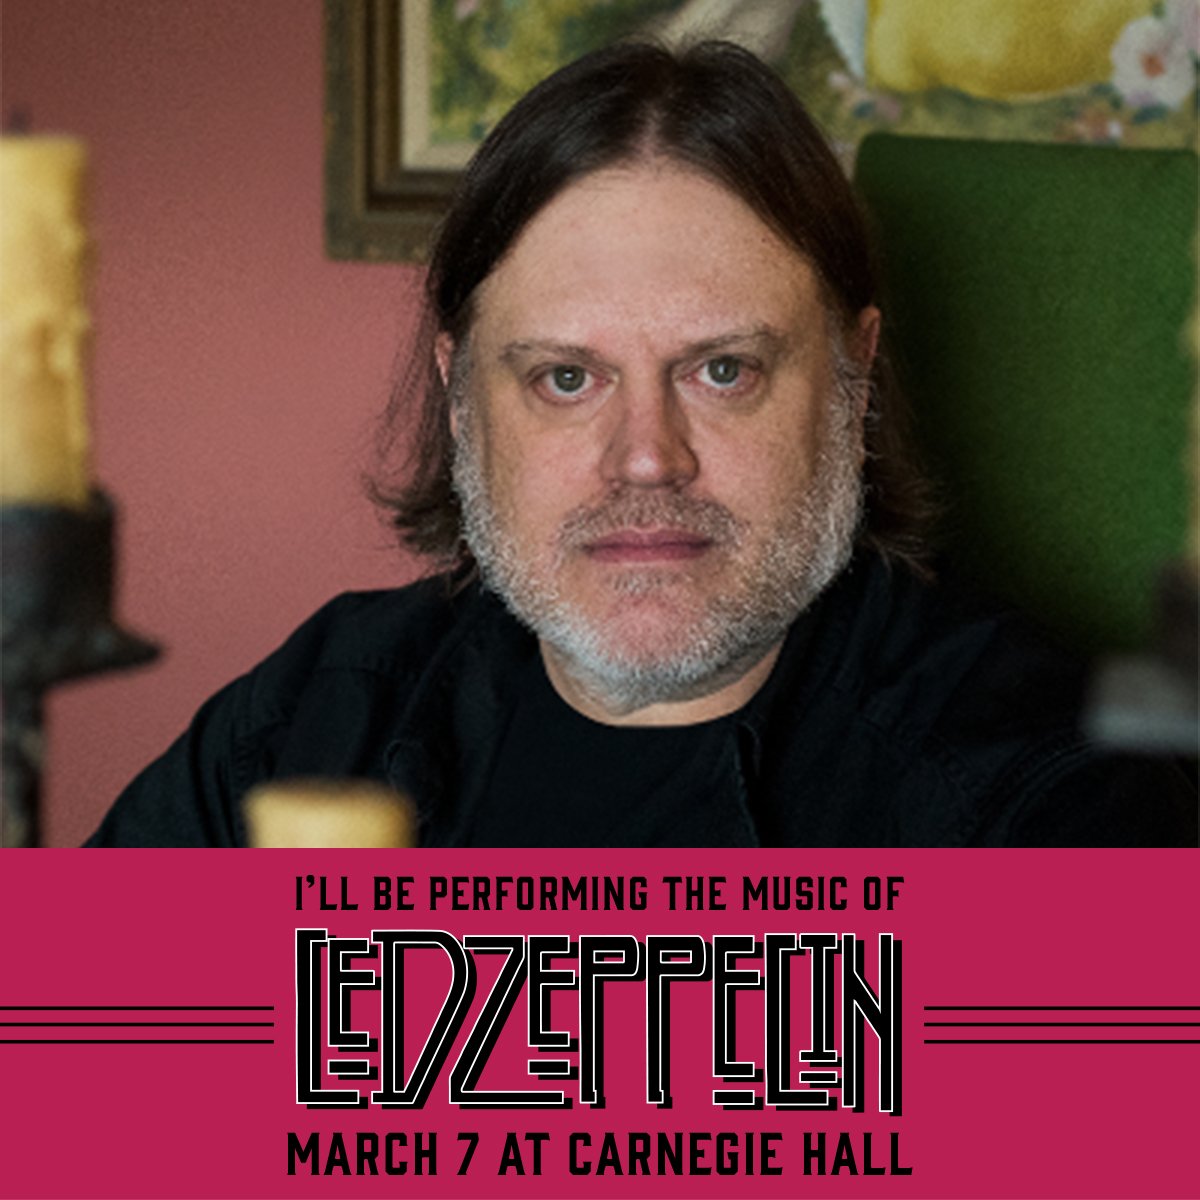 NEW YORK! I'm performing at the #MusicOfLedZeppelin benefit on March 7th at Carnegie Hall! Buy Tickets Here: bit.ly/2EYKy3G! Music Of musicof.org